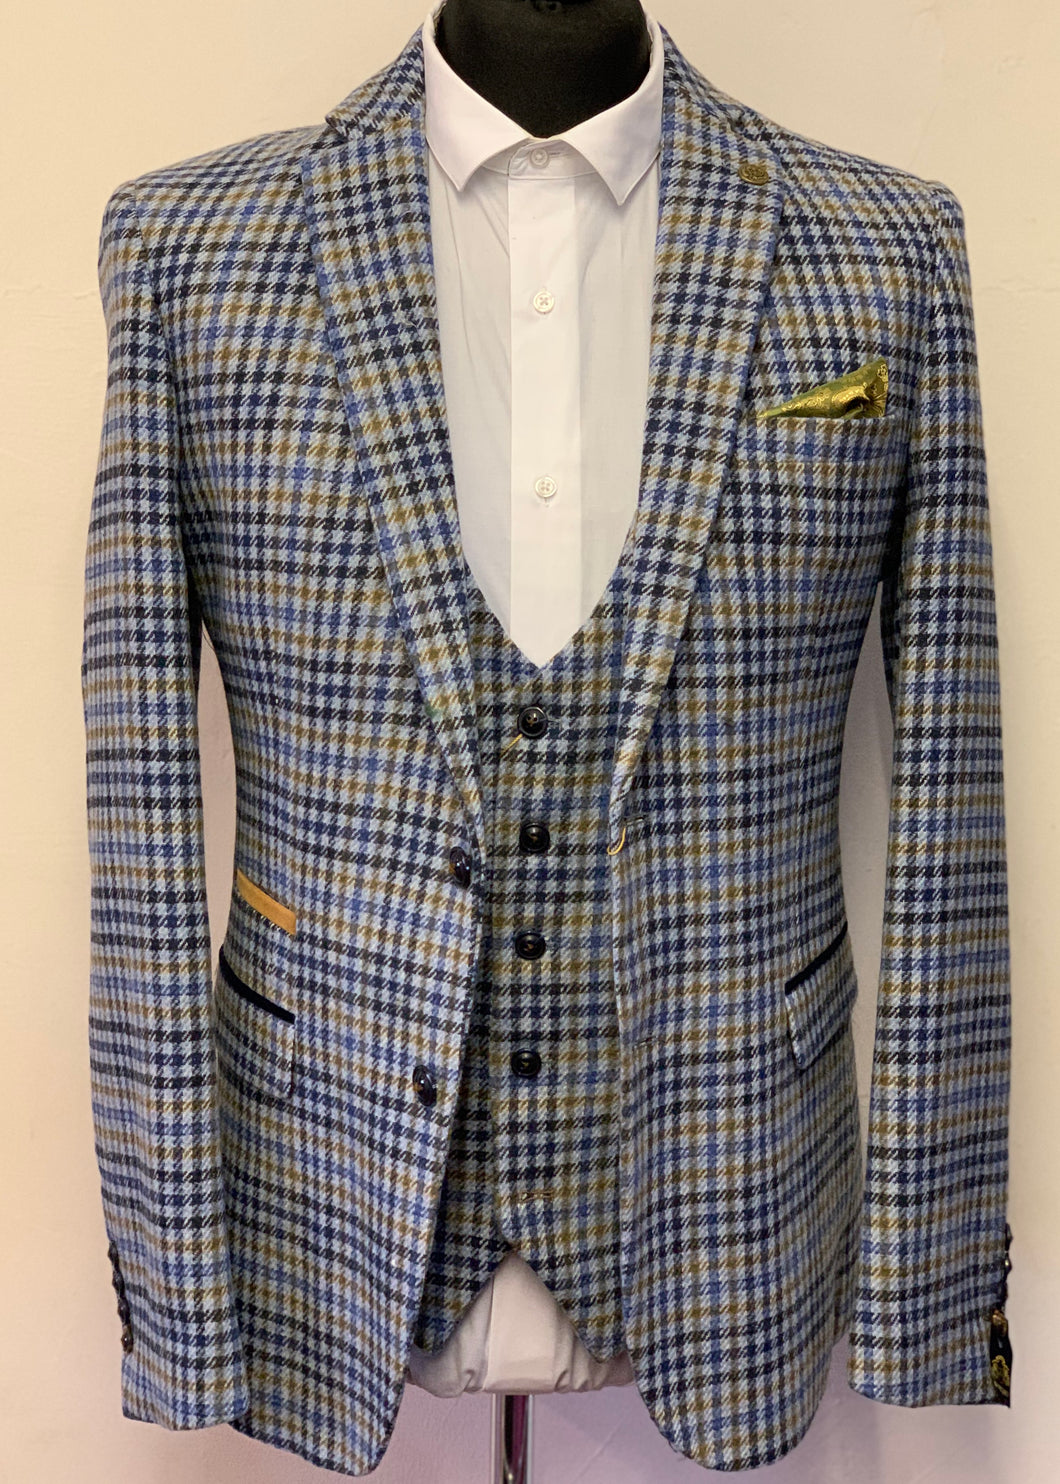 Marc Darcy Watson Blue Tweed Checked Jacket with matching waistcoat and gold pocket square. 